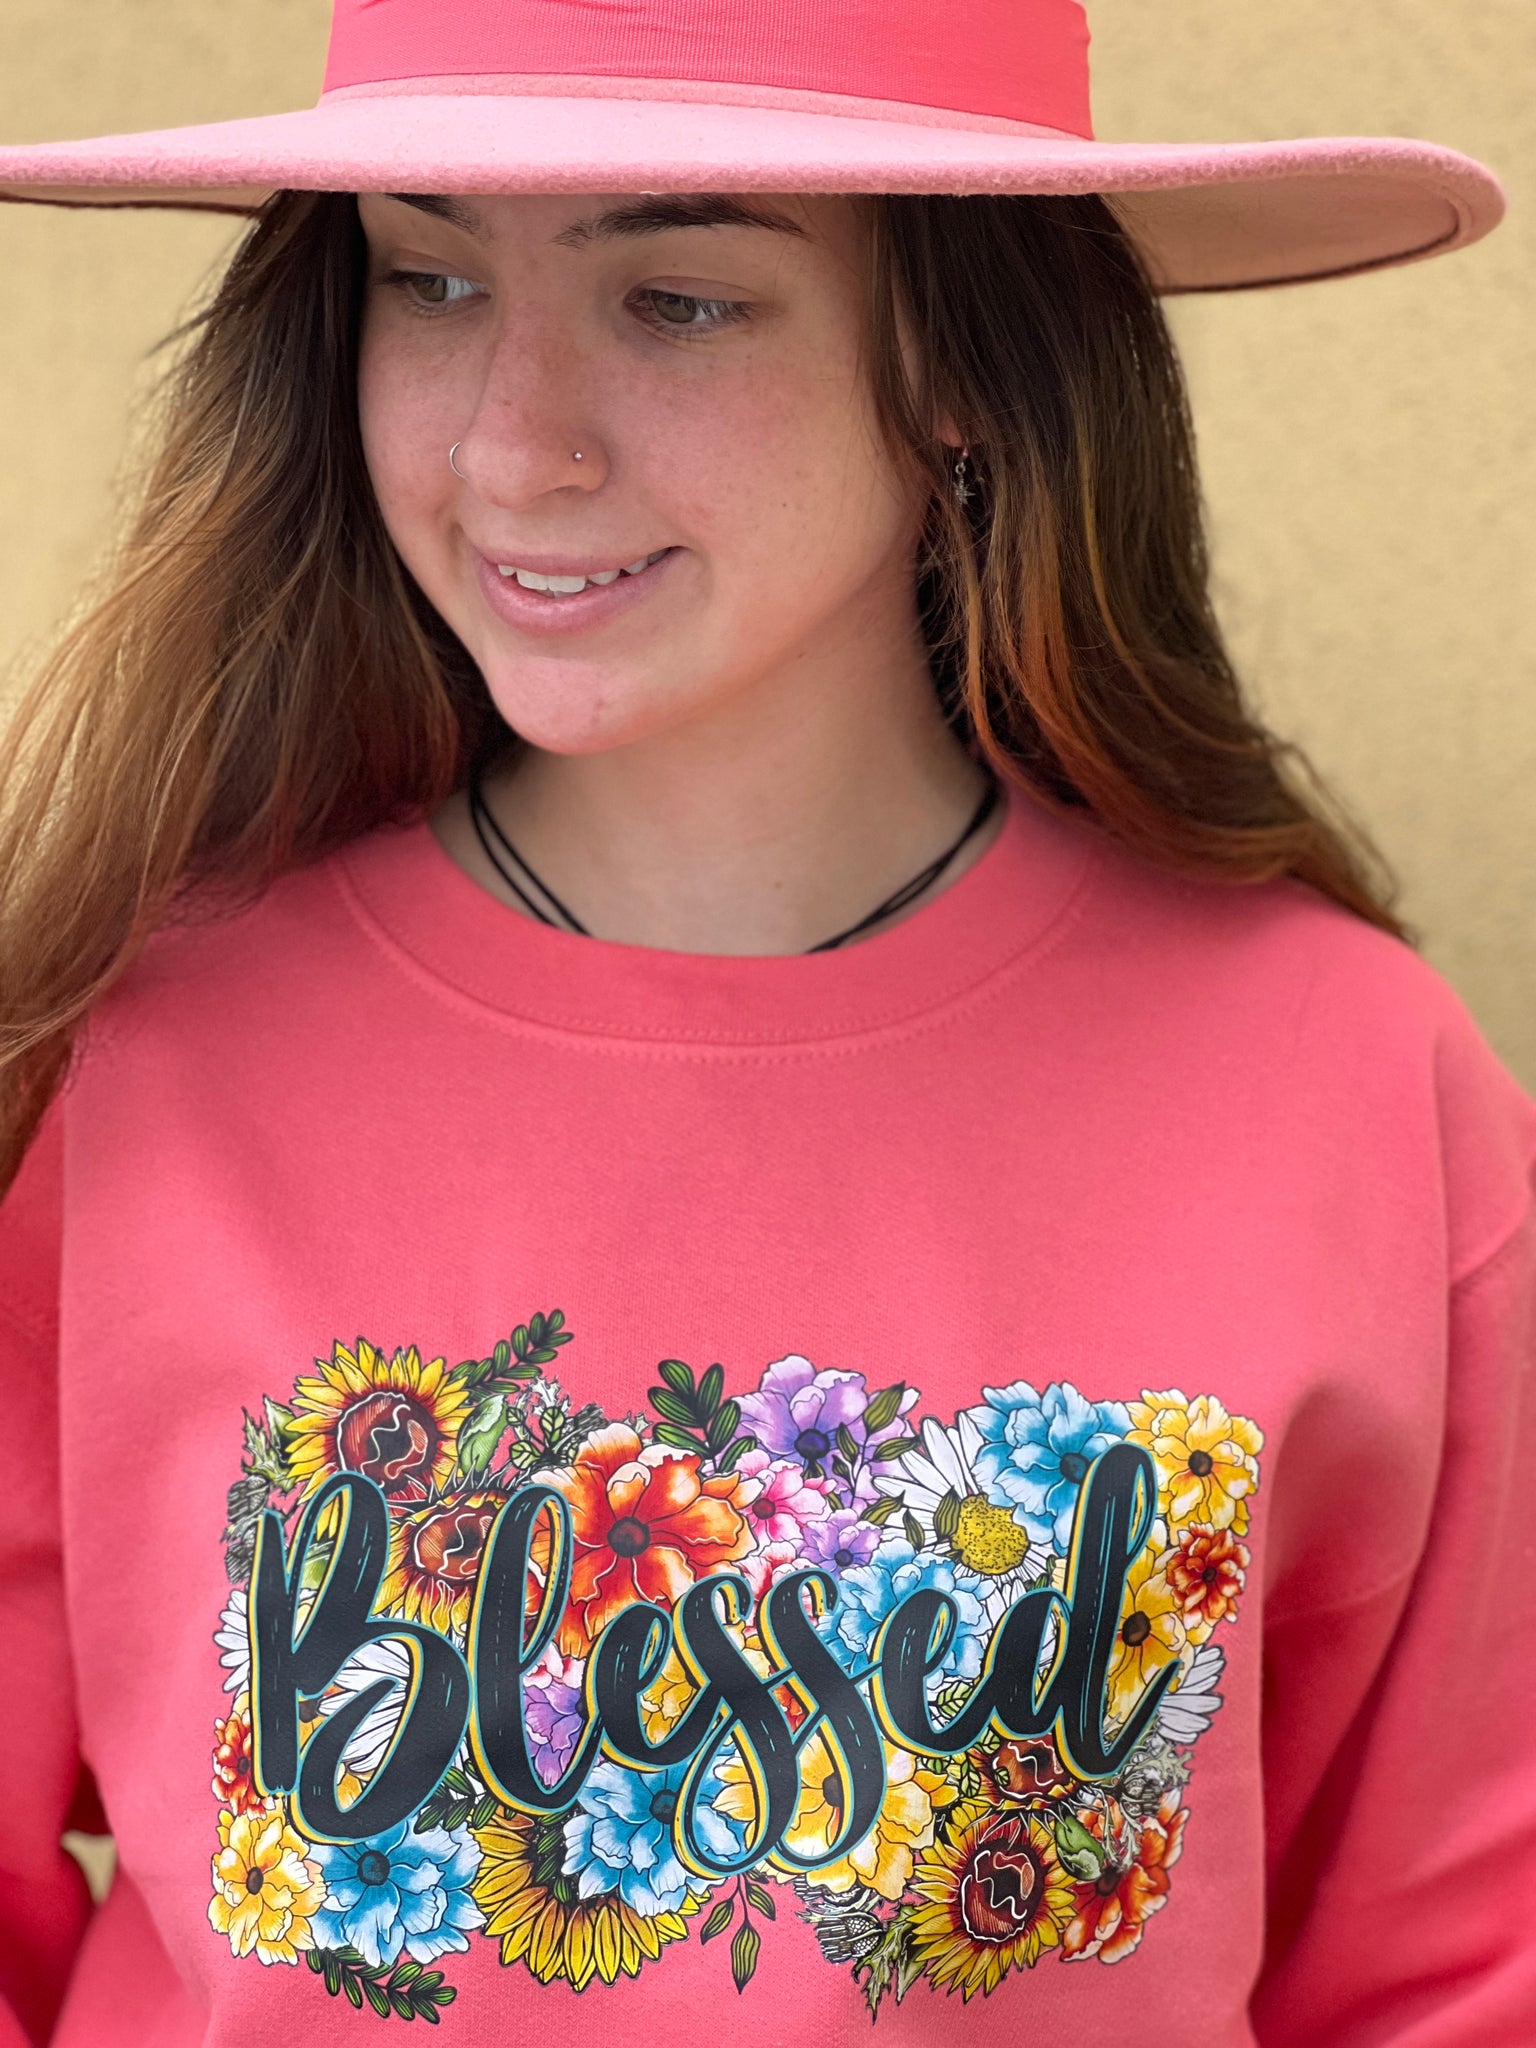 NEW! Blessed. Sweatshirt, Coral. Crew Neck Sweatshirt by Touch of South. - touchofsouth